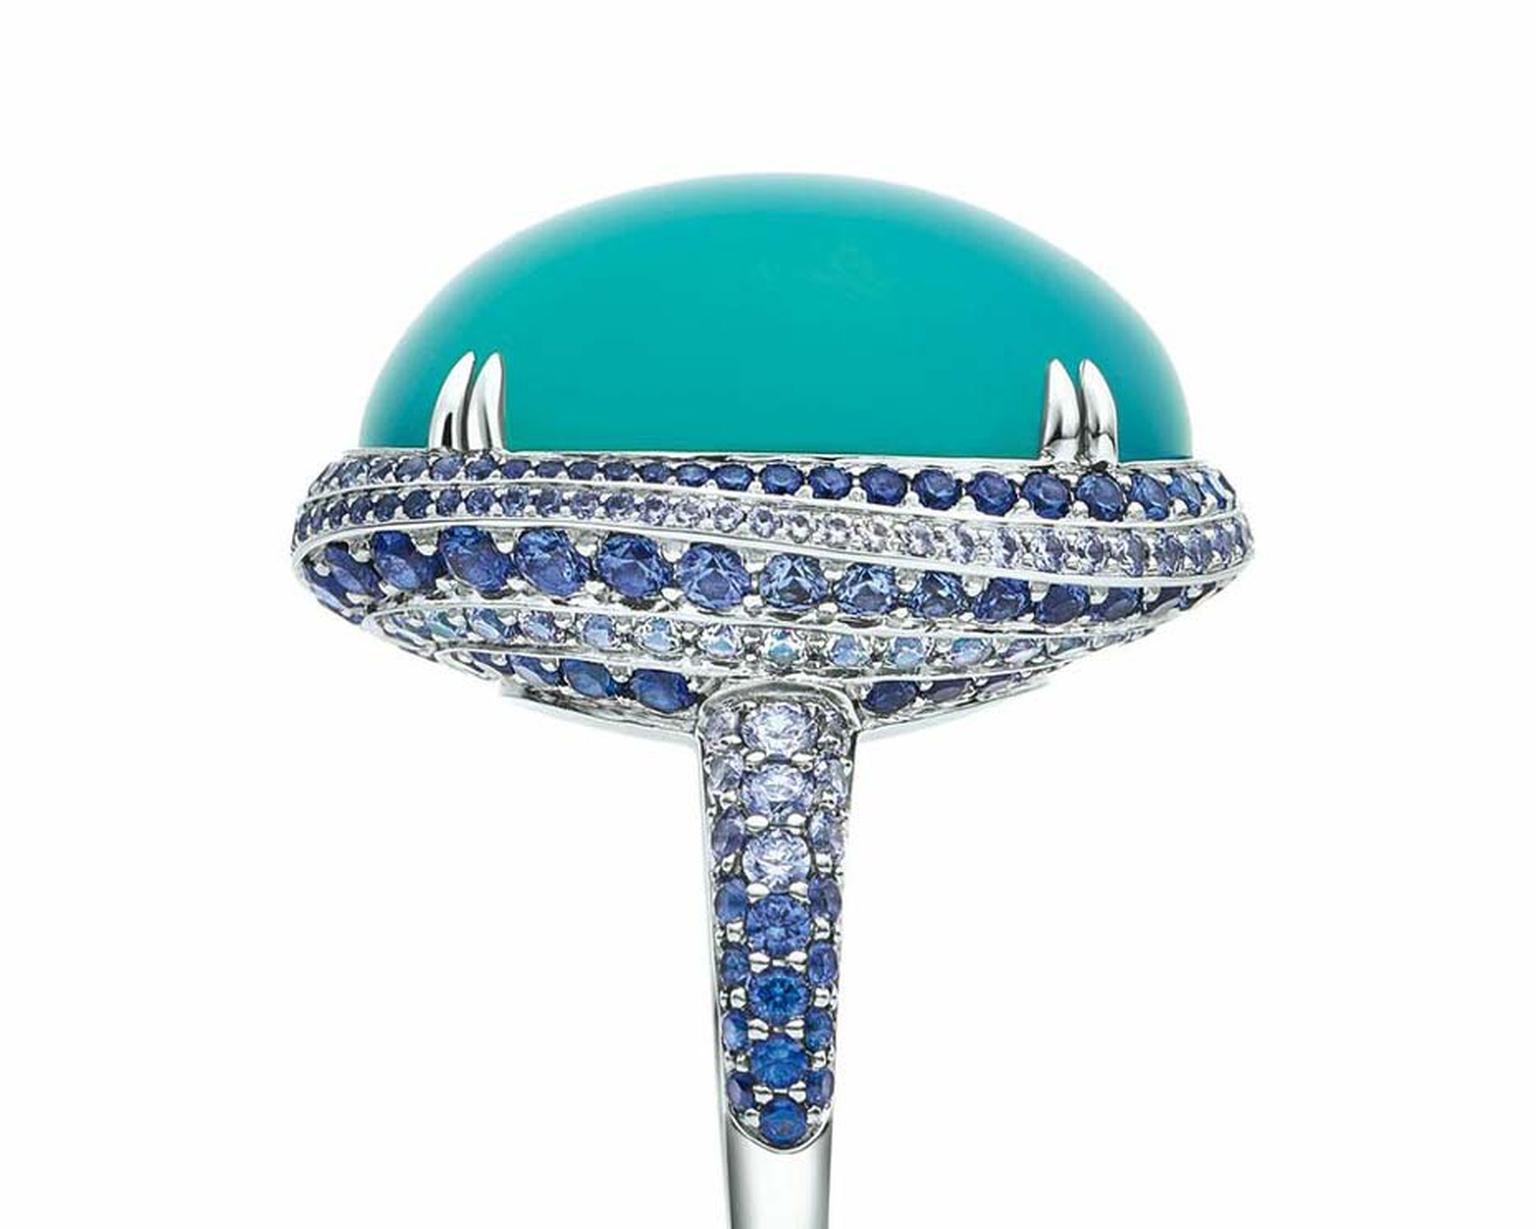 Tiffany ring set with a 21.66ct chrysocolla surrounded by sapphires in platinum, from the 2015 Blue Book high jewellery collection.